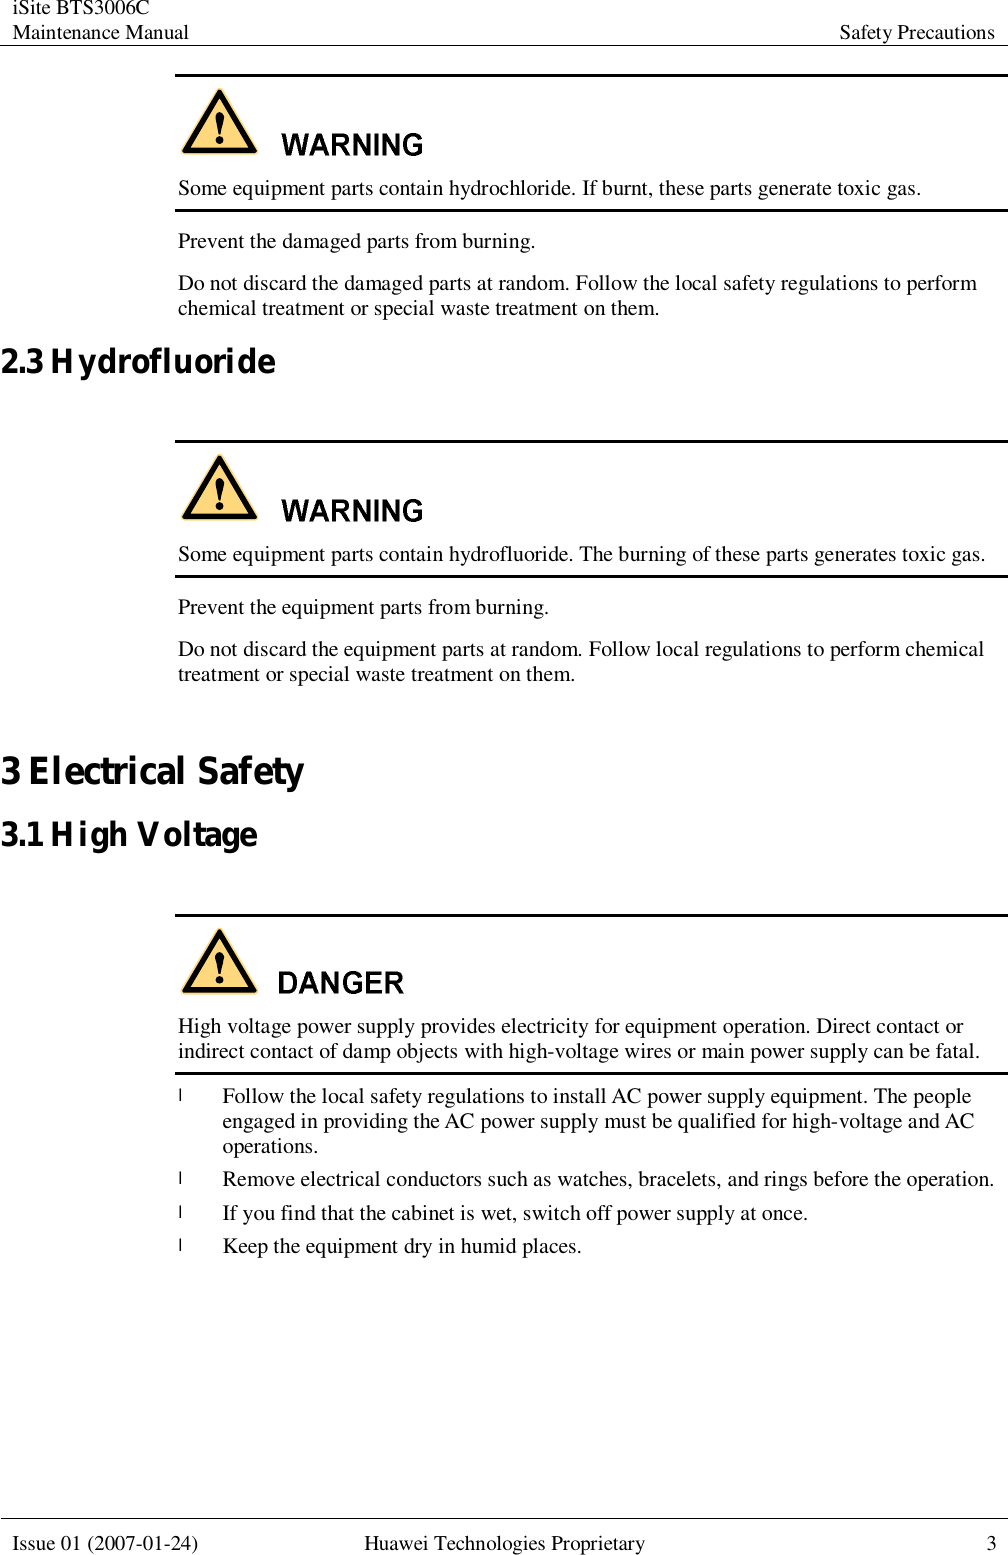 iSite BTS3006C Maintenance Manual Safety Precautions  Issue 01 (2007-01-24) Huawei Technologies Proprietary 3   Some equipment parts contain hydrochloride. If burnt, these parts generate toxic gas. Prevent the damaged parts from burning. Do not discard the damaged parts at random. Follow the local safety regulations to perform chemical treatment or special waste treatment on them. 2.3 Hydrofluoride   Some equipment parts contain hydrofluoride. The burning of these parts generates toxic gas. Prevent the equipment parts from burning. Do not discard the equipment parts at random. Follow local regulations to perform chemical treatment or special waste treatment on them. 3 Electrical Safety 3.1 High Voltage   High voltage power supply provides electricity for equipment operation. Direct contact or indirect contact of damp objects with high-voltage wires or main power supply can be fatal. l Follow the local safety regulations to install AC power supply equipment. The people engaged in providing the AC power supply must be qualified for high-voltage and AC operations. l Remove electrical conductors such as watches, bracelets, and rings before the operation. l If you find that the cabinet is wet, switch off power supply at once. l Keep the equipment dry in humid places.  